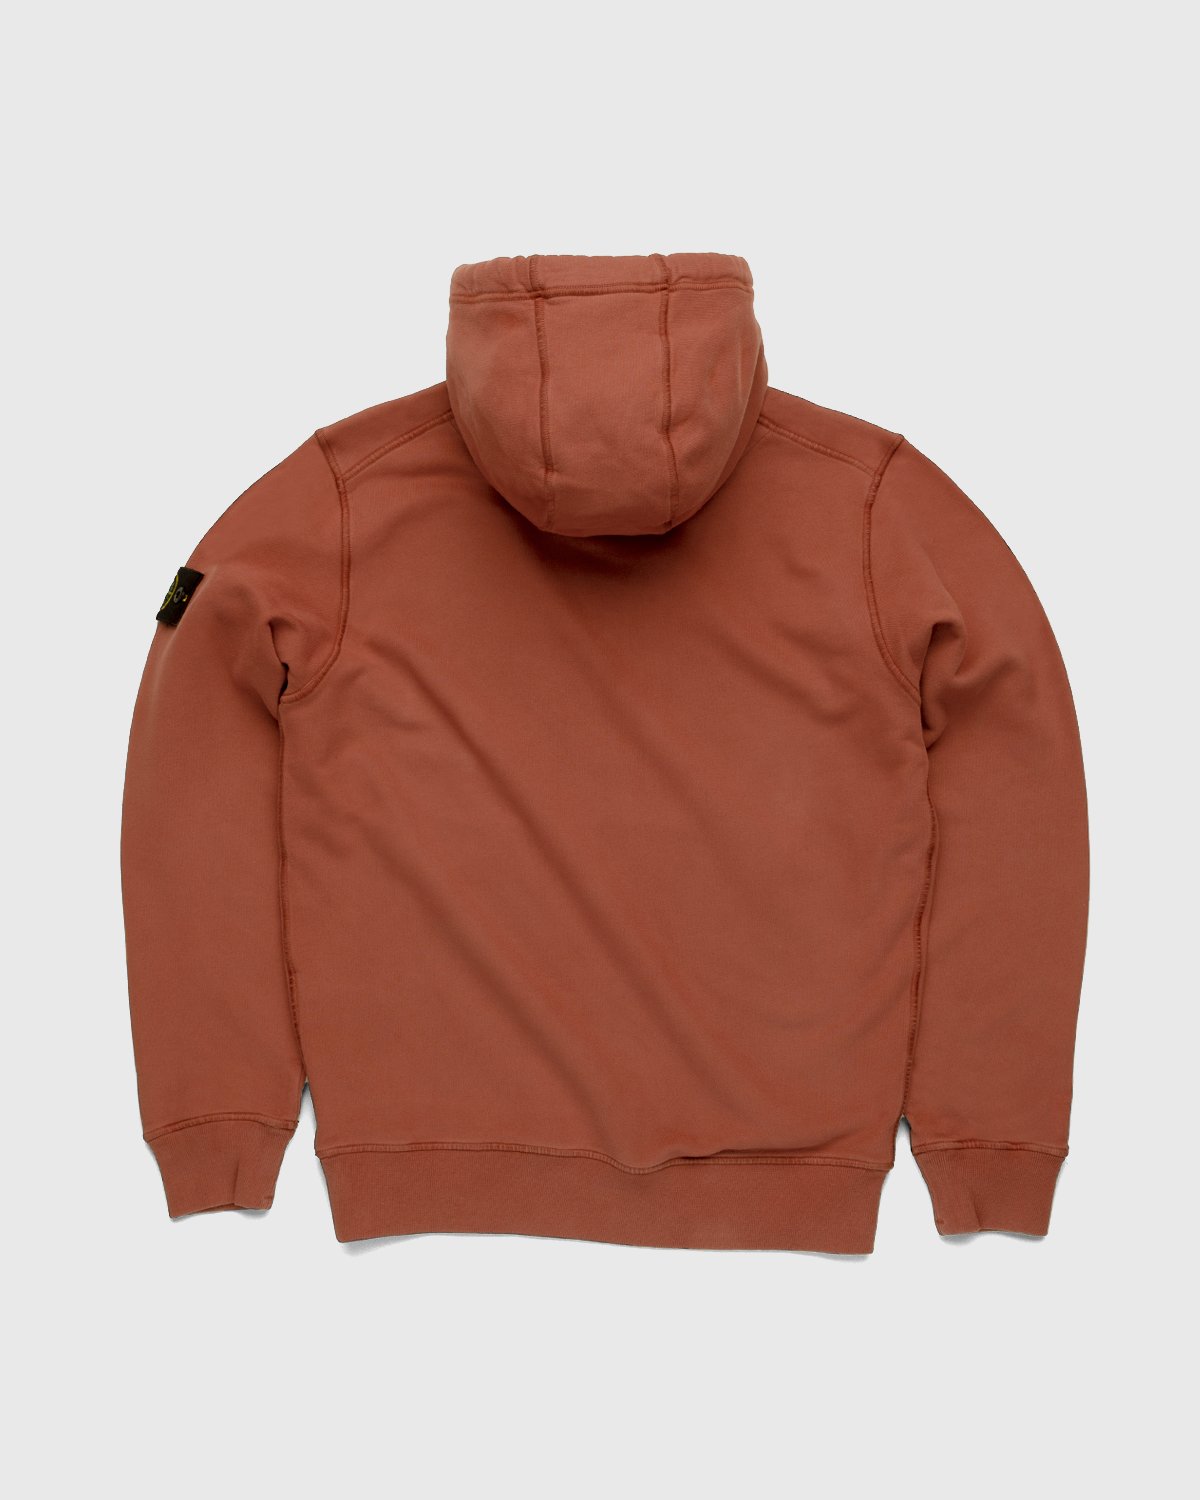 Stone Island - Dust Color Treatment Hoodie Brick Red - Clothing - Red - Image 2